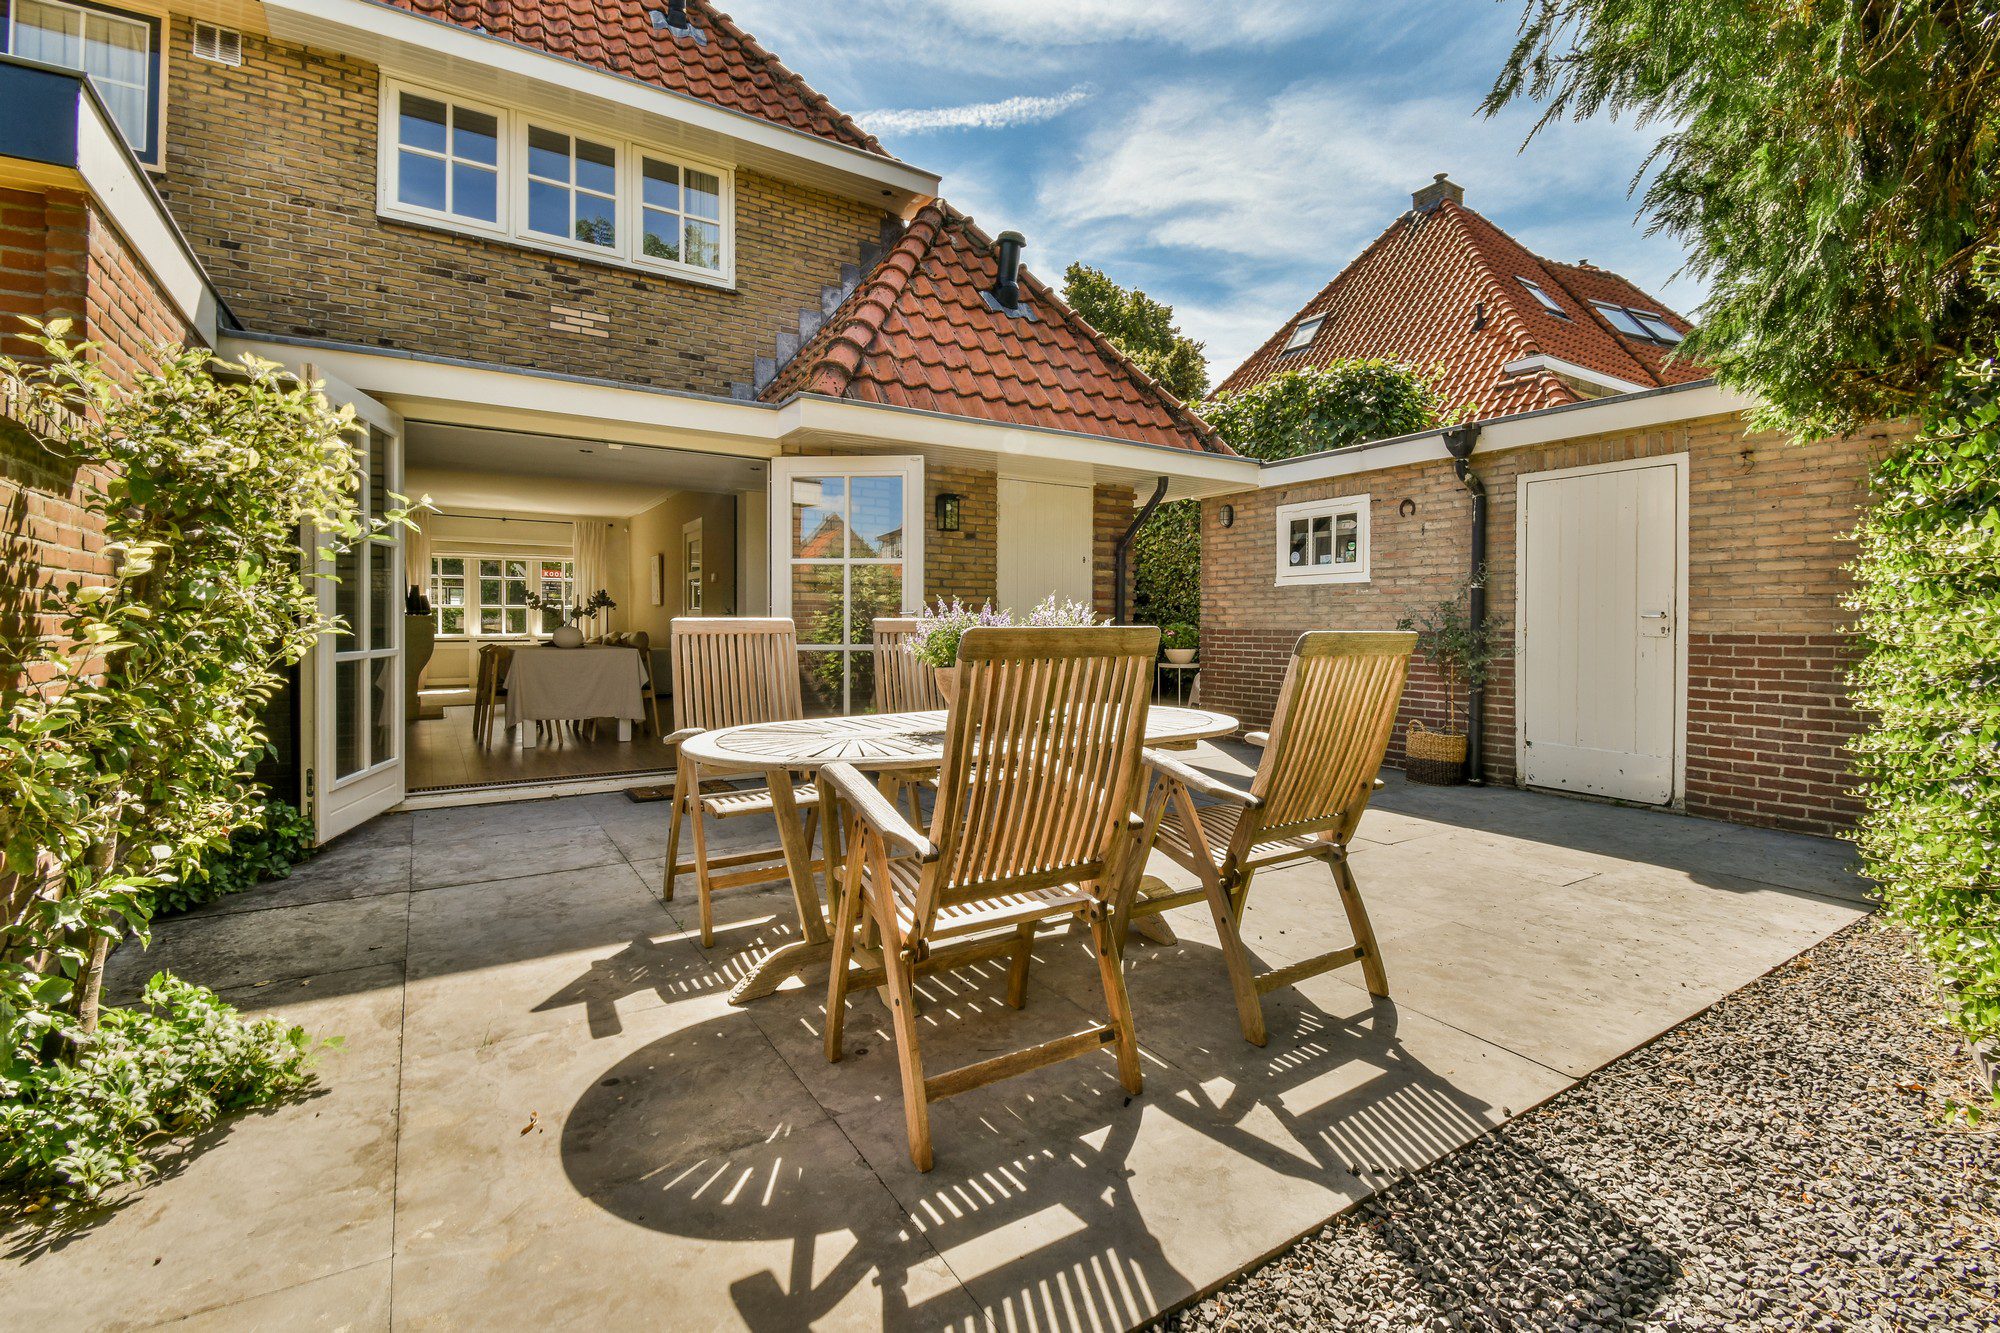 The image shows a sunny outdoor patio area of a house. There is a set of wooden garden furniture consisting of a round table and four folding chairs. The ground has a combination of paving stones and some areas with small pebbles.In the background, you can see the exterior of the house which has a brick facade and tiled roof, indicating a traditional architectural style. The house features double doors that open onto the patio, and above the doors, there is a canopy providing shade. Additionally, there is a white door to what may be a shed or storage area on the right side of the image.The scene is framed by various plants and shrubbery, hinting at a well-maintained garden space. The sky is blue with some scattered clouds, suggesting pleasant weather conditions. It looks like a calm and inviting space, ideal for outdoor dining or relaxation.